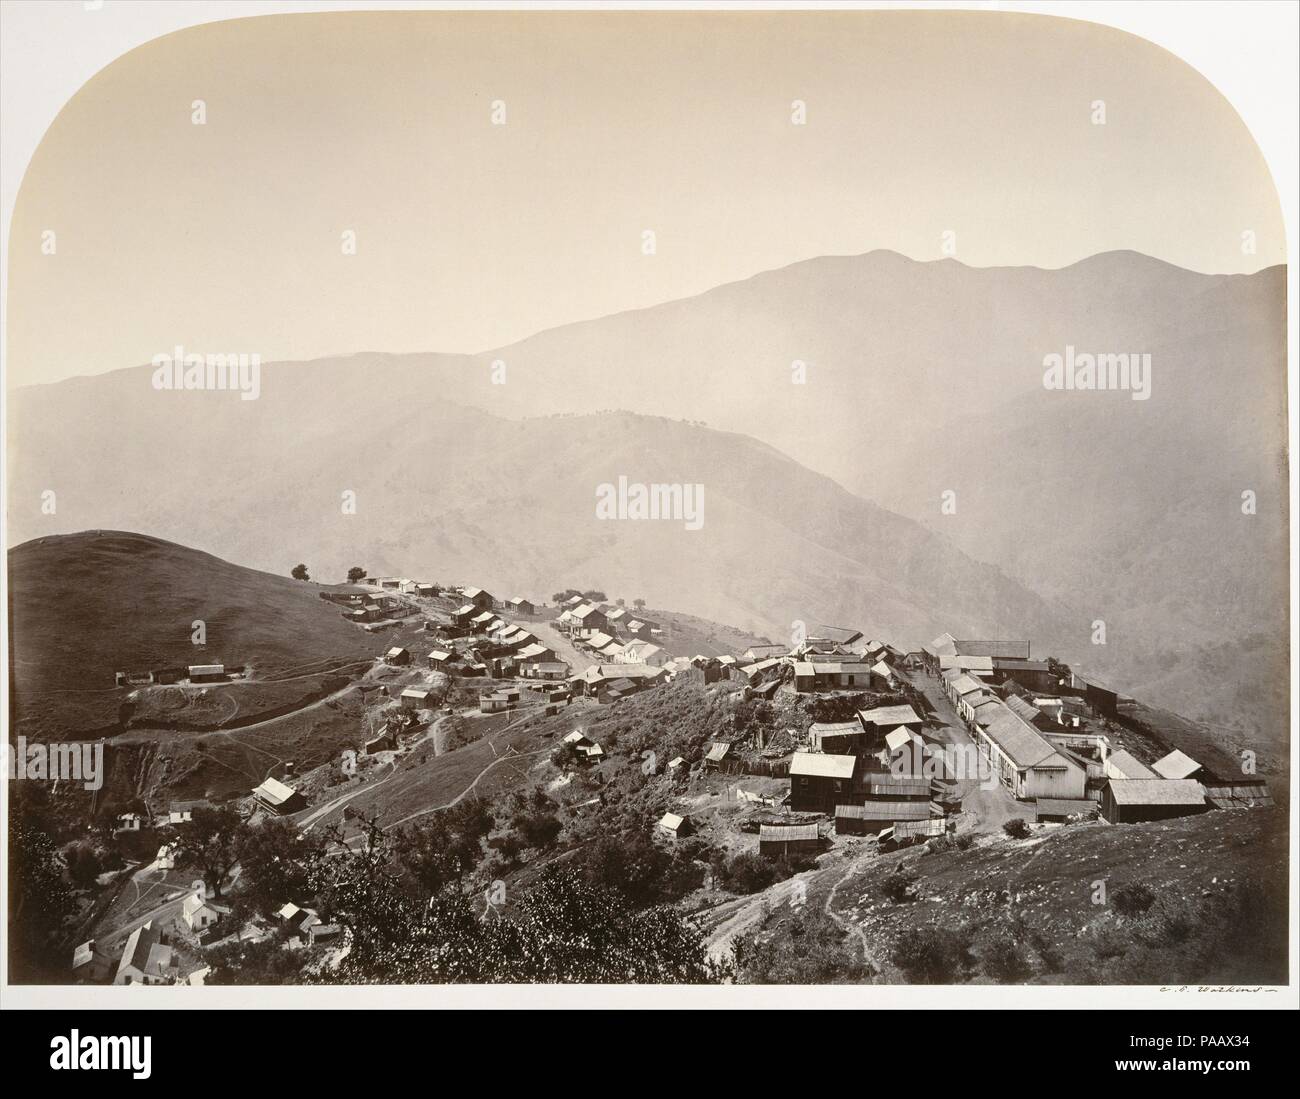 The Town on the Hill, New Almaden. Artist: Carleton E. Watkins (American, 1829-1916). Dimensions: 39.7 x 52.3 cm (15 5/8 x 20 9/16 in.). Date: 1863.  Watkins, the consummate photographer of the American West, combined a virtuoso mastery of the difficult wet-plate negative process with a rigorous sense of pictorial structure.  In 1863 he was hired to make a photographic survey of the quicksilver mining operations in New Almaden, near San Jose, California.  Quicksilver--used to bond with, and weigh down, the finest particles of gold that might otherwise float away in the sluicing process--was es Stock Photo